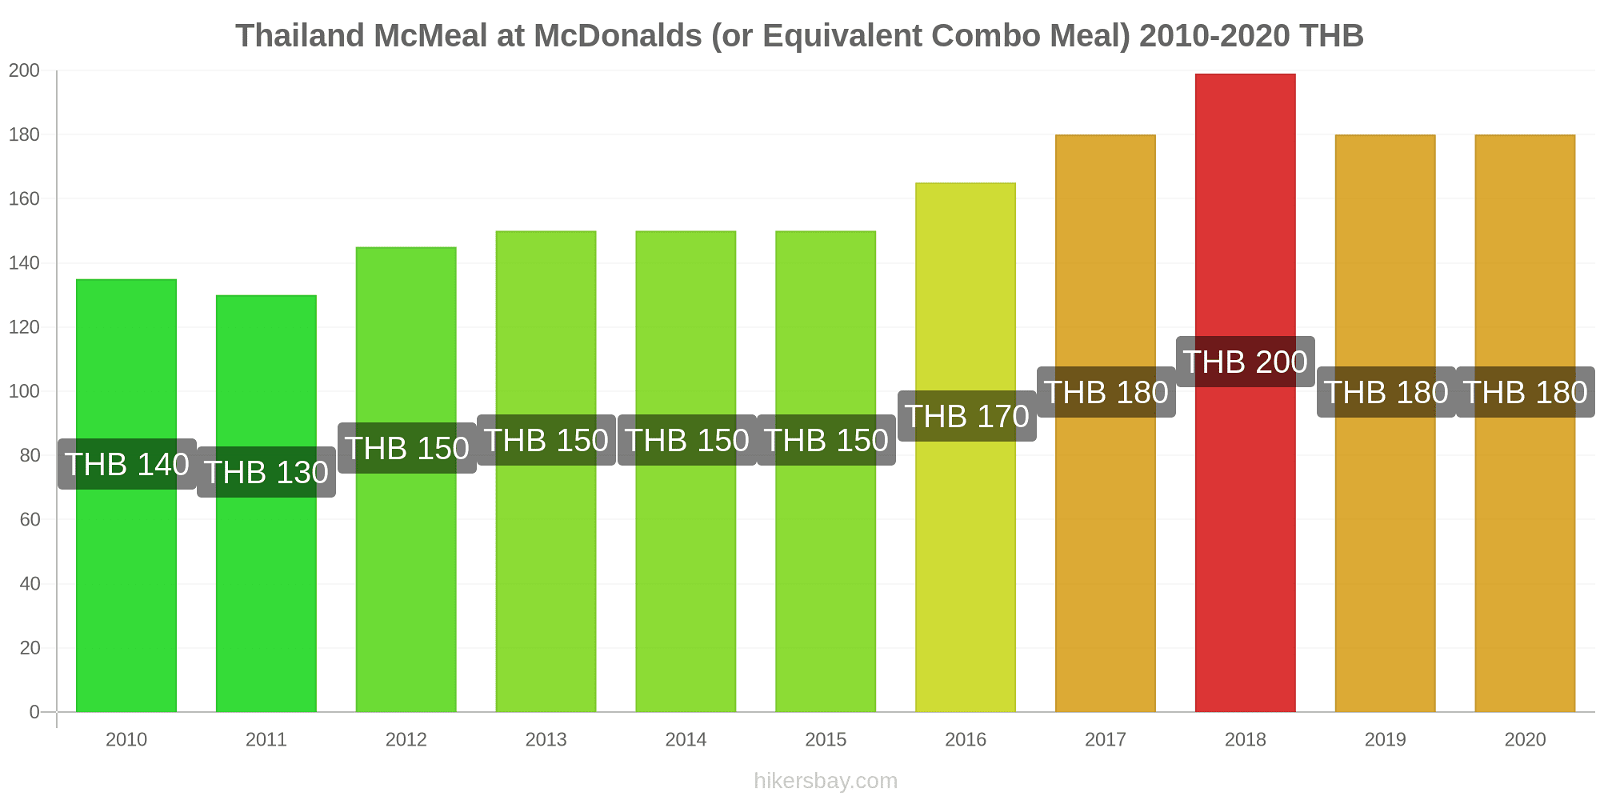 Thailand price changes McMeal at McDonalds (or Equivalent Combo Meal) hikersbay.com